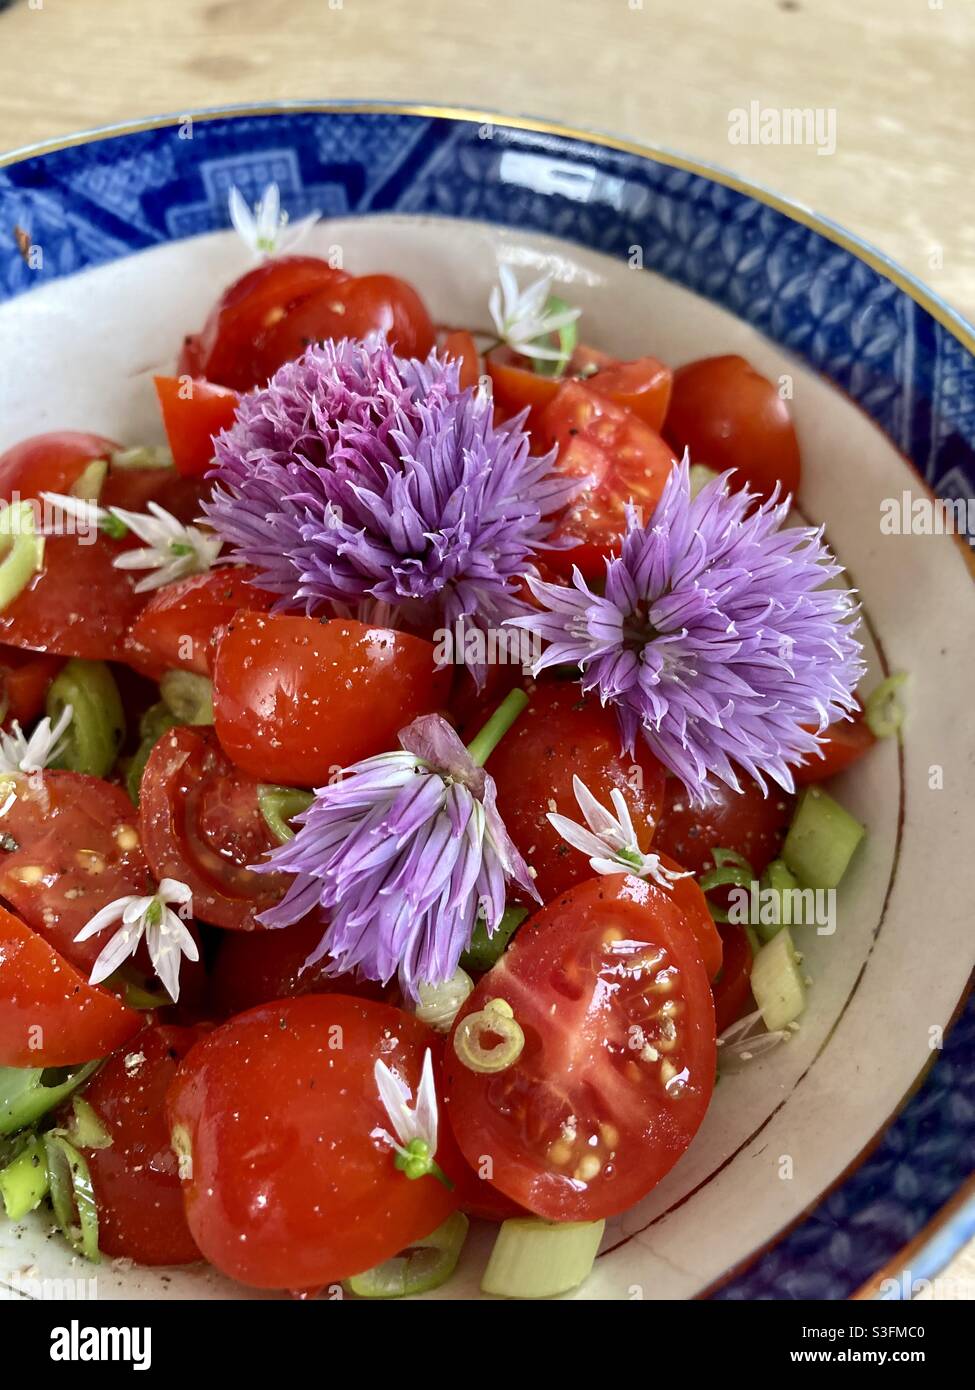 Tomato salad with purple chive flowers and sliced spring onions with wild garlic flowers - spring salad- purple and red salad - blue rim bowl Stock Photo